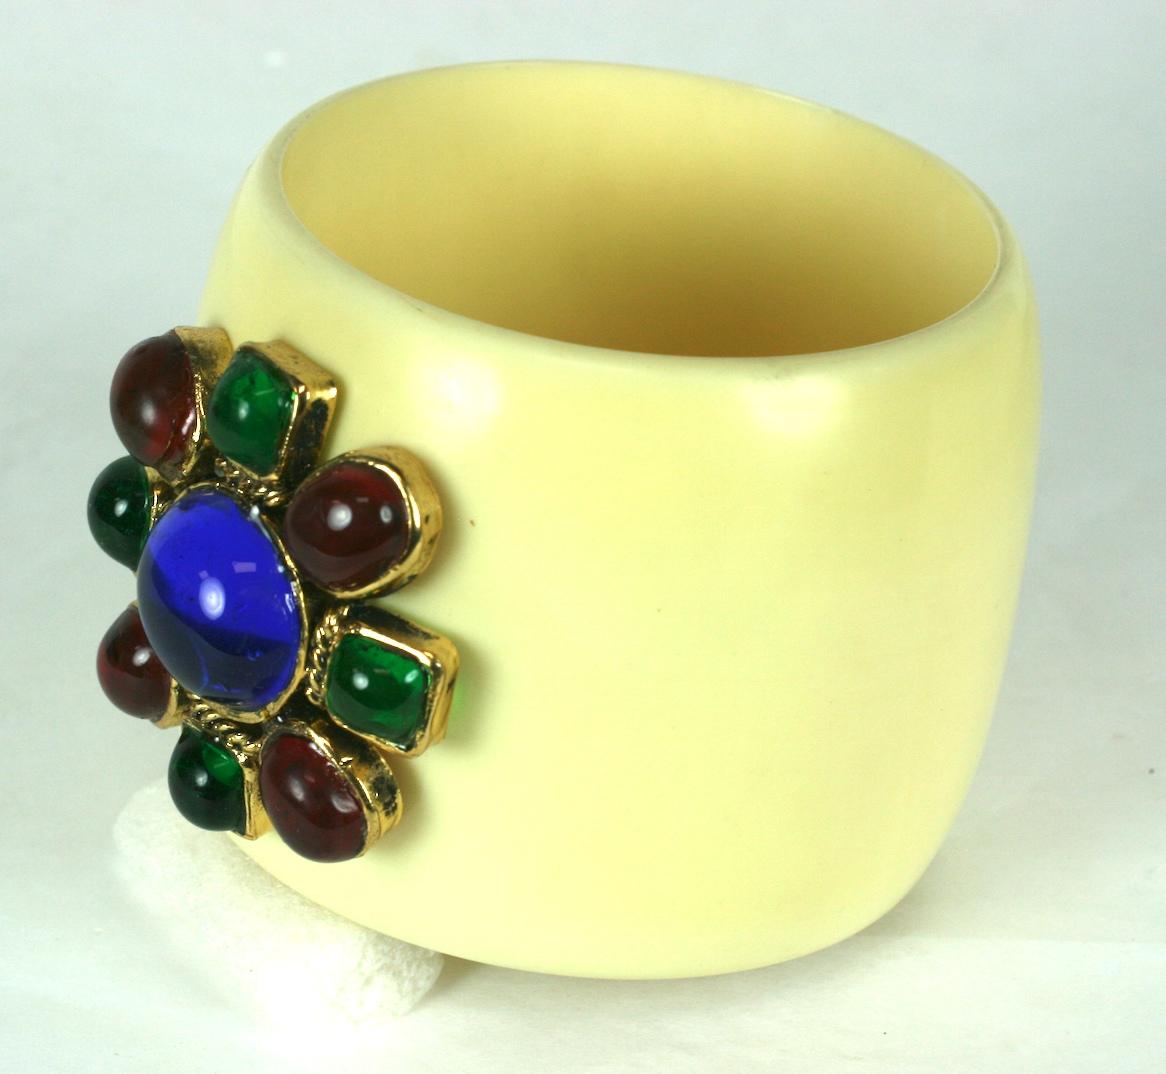 Chanel ivory resin cuff bracelet by Karl Lagerfeld, inspired by the original Maltese Cross Cuffs that Verdura designed for Chanel in the 1930s decorated with a ruby, emerald and sapphire poured glass enamel crest by Maison Gripoix. 
The jeweled cuff